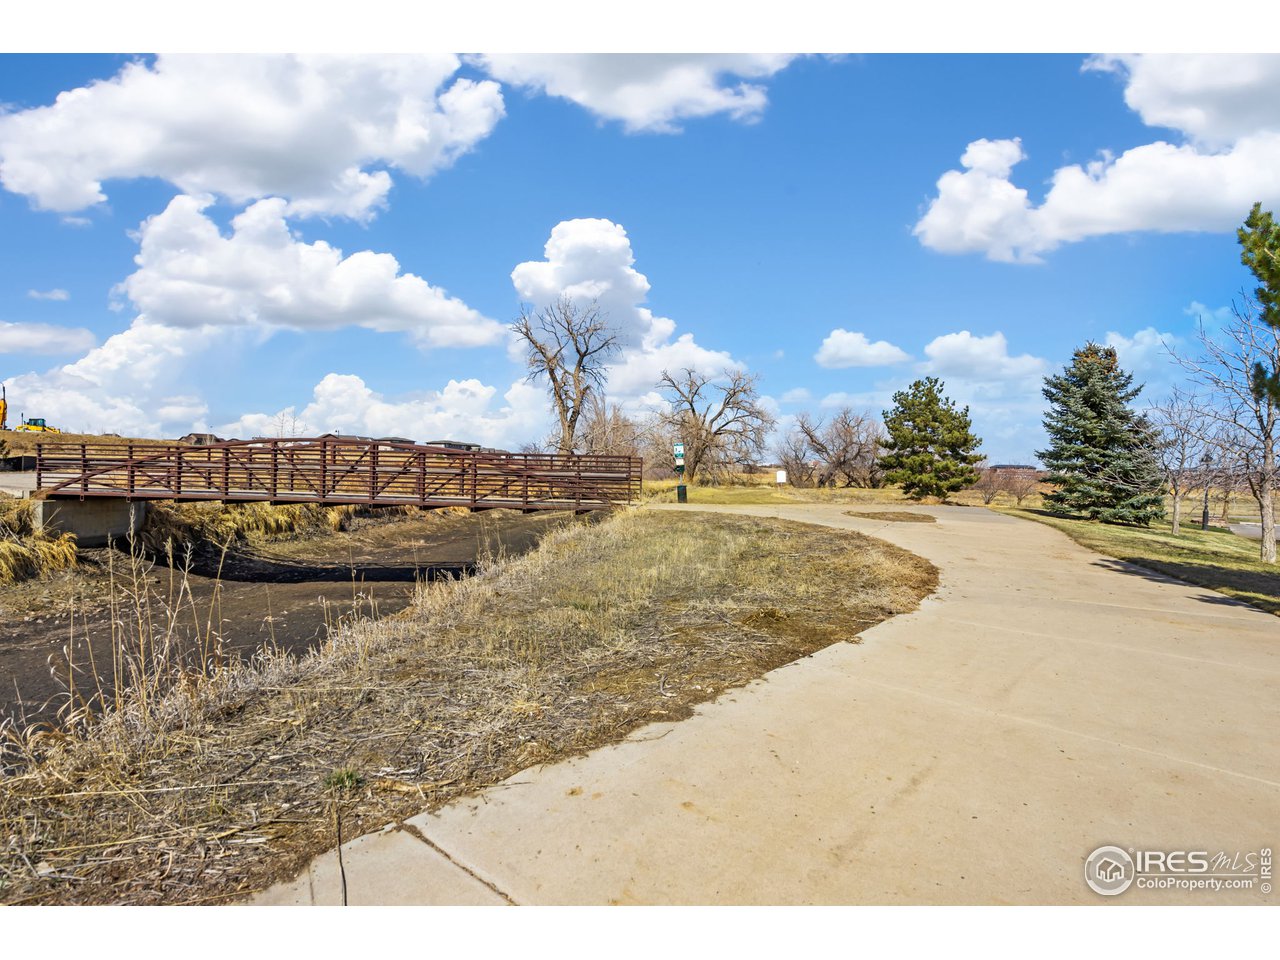 Close to trails, lakes, dog park so you can enjoy Colorado sun all year around.